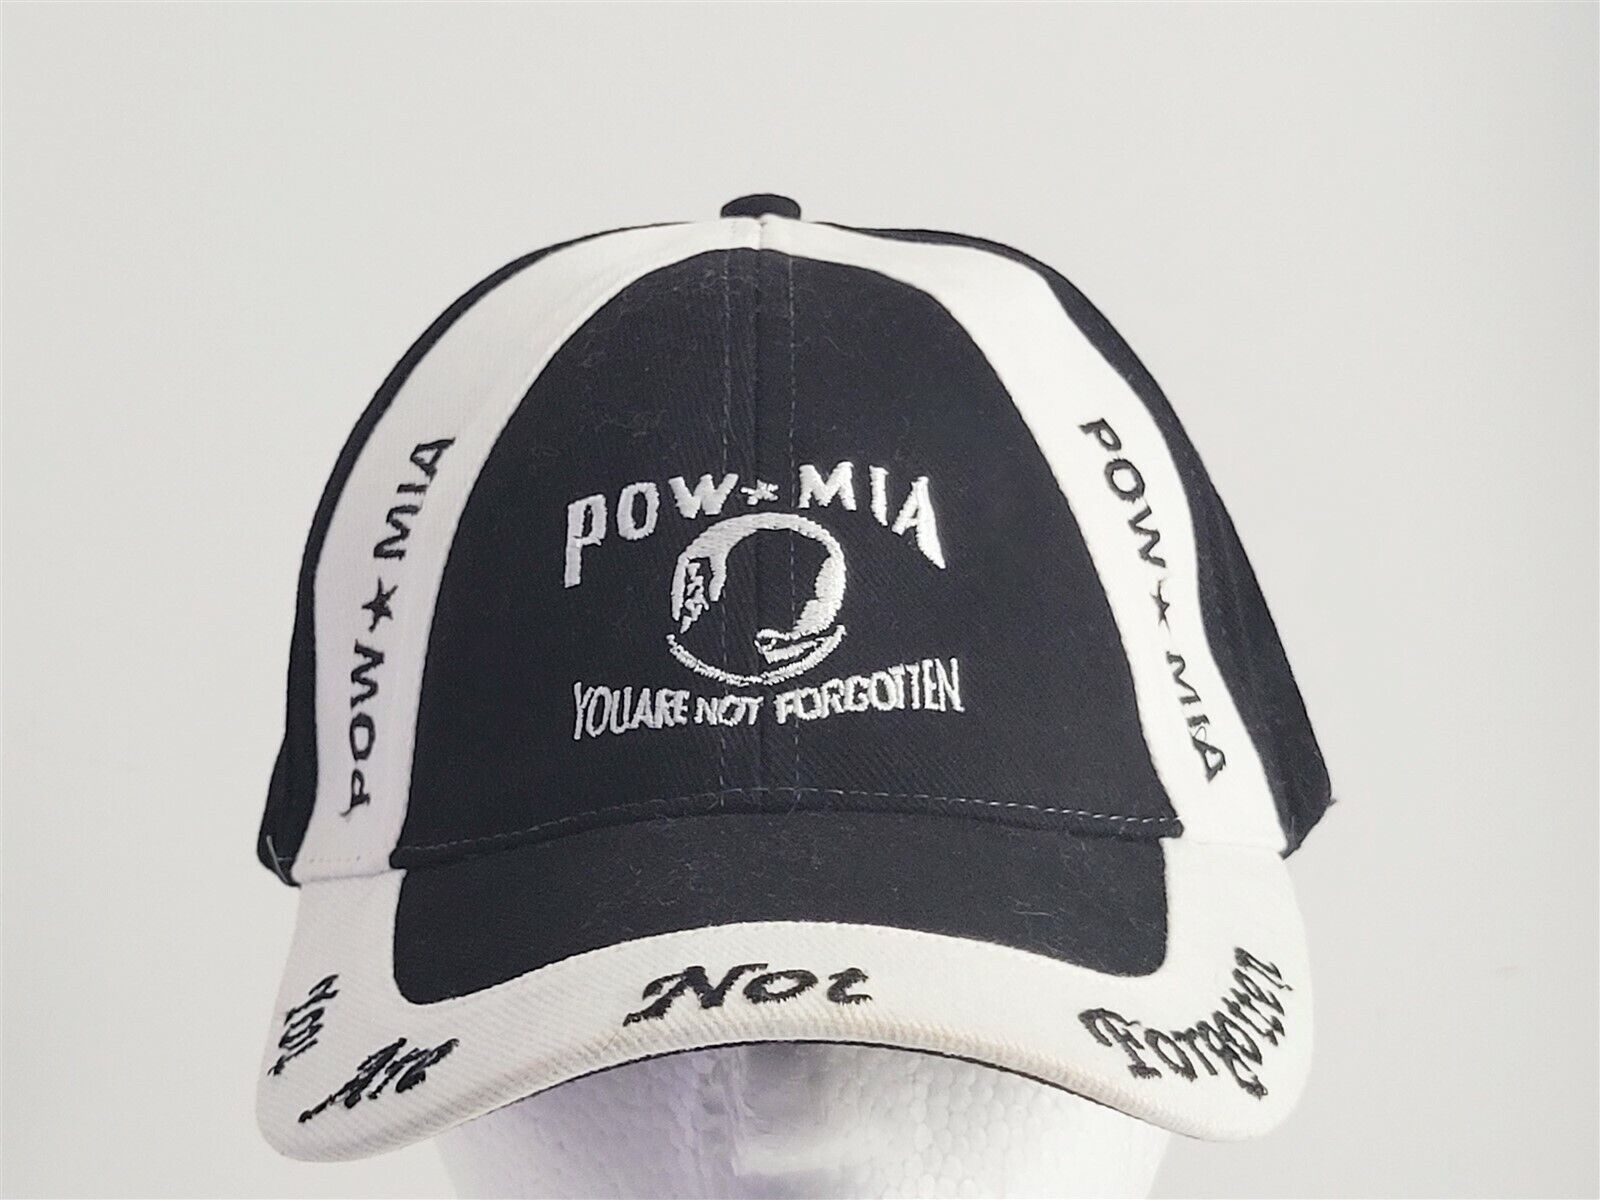 POW MIA You Are Not Forgotten Black White Ball Cap Hat Embroidered Adjustable